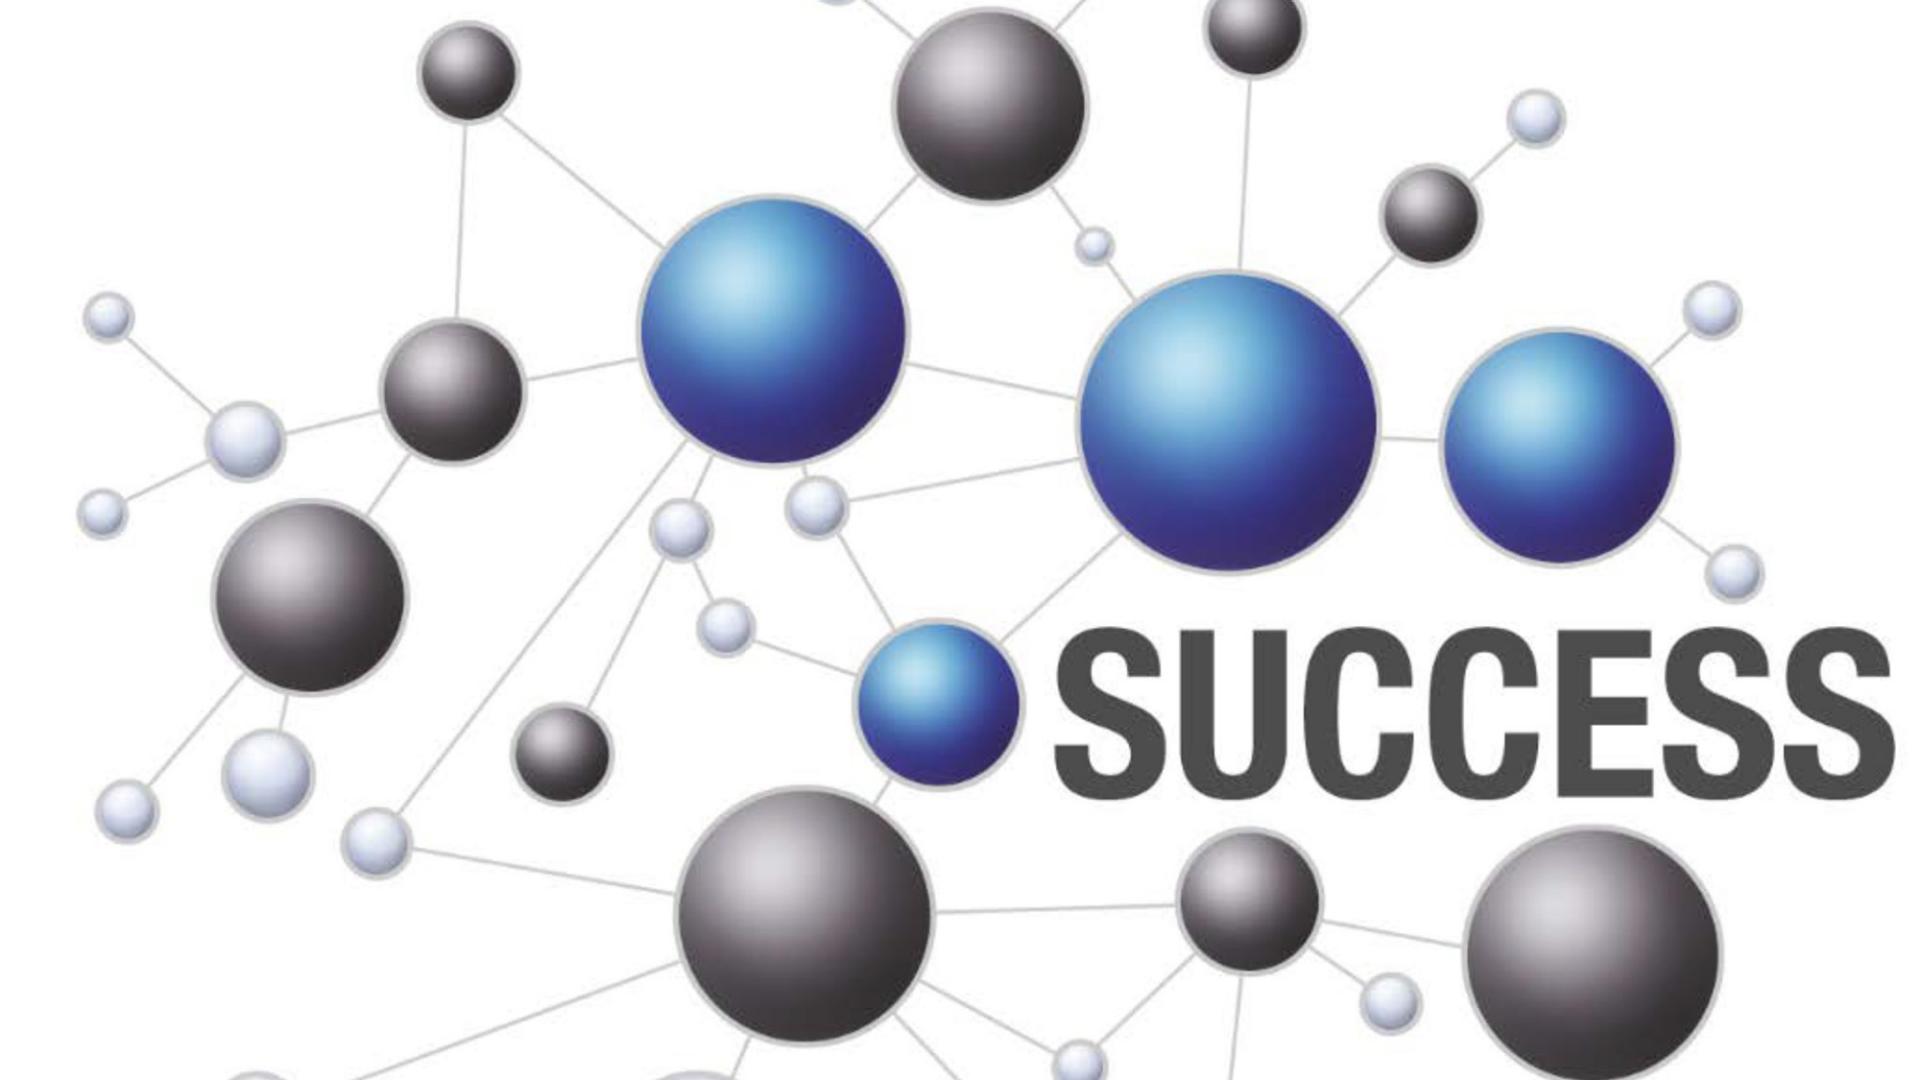 The logo for the Success theme at SMT shows interconnected dots - the partner network.